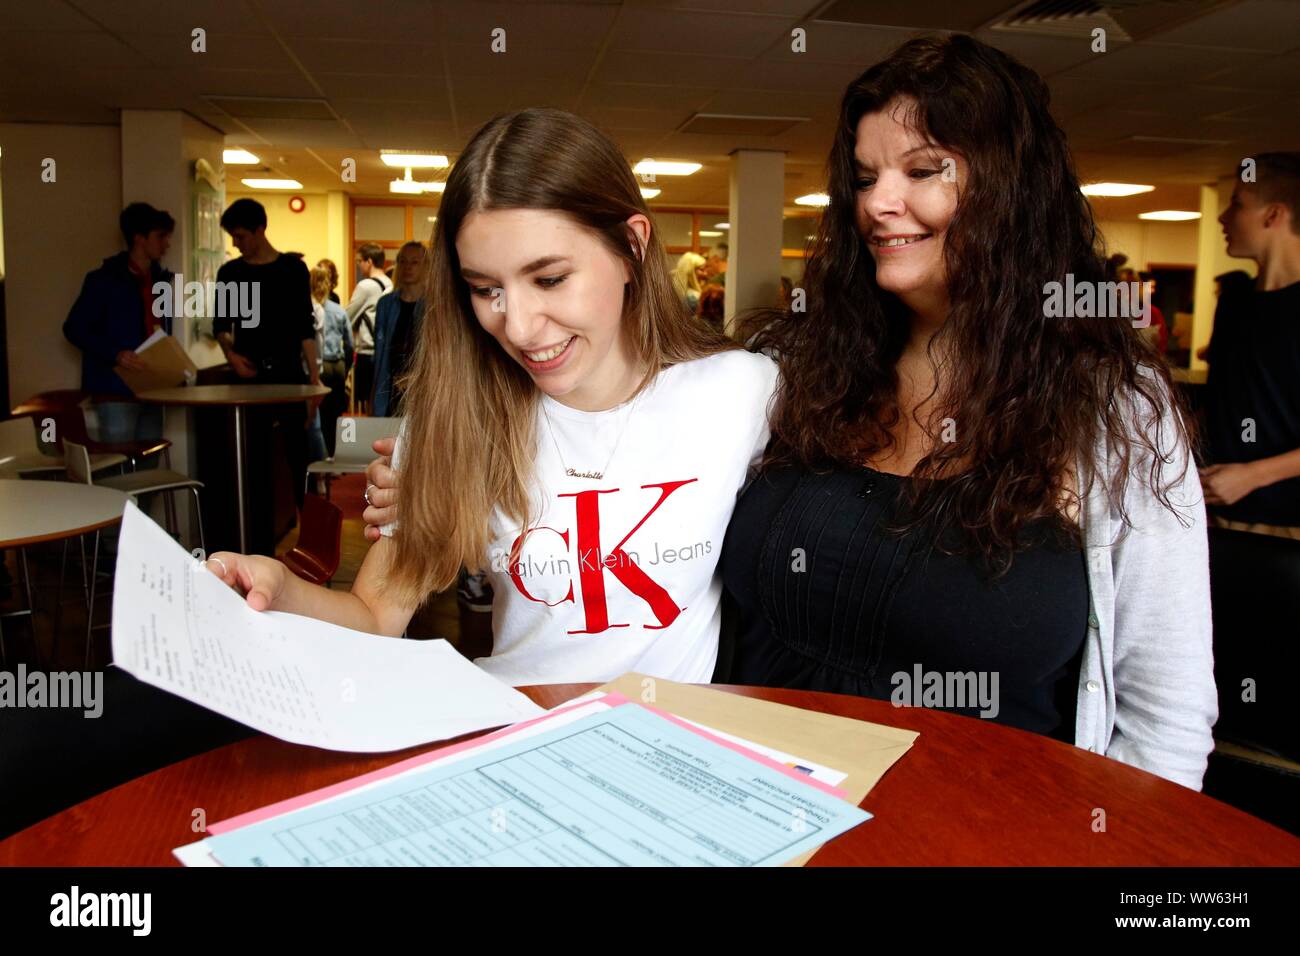 Charlotte Simmonds, who got three 7 grades, with her mum Caroline, at GCSE results day at Balcarras Academy, Cheltenham. 22/08/2019 Picture by Andrew Stock Photo